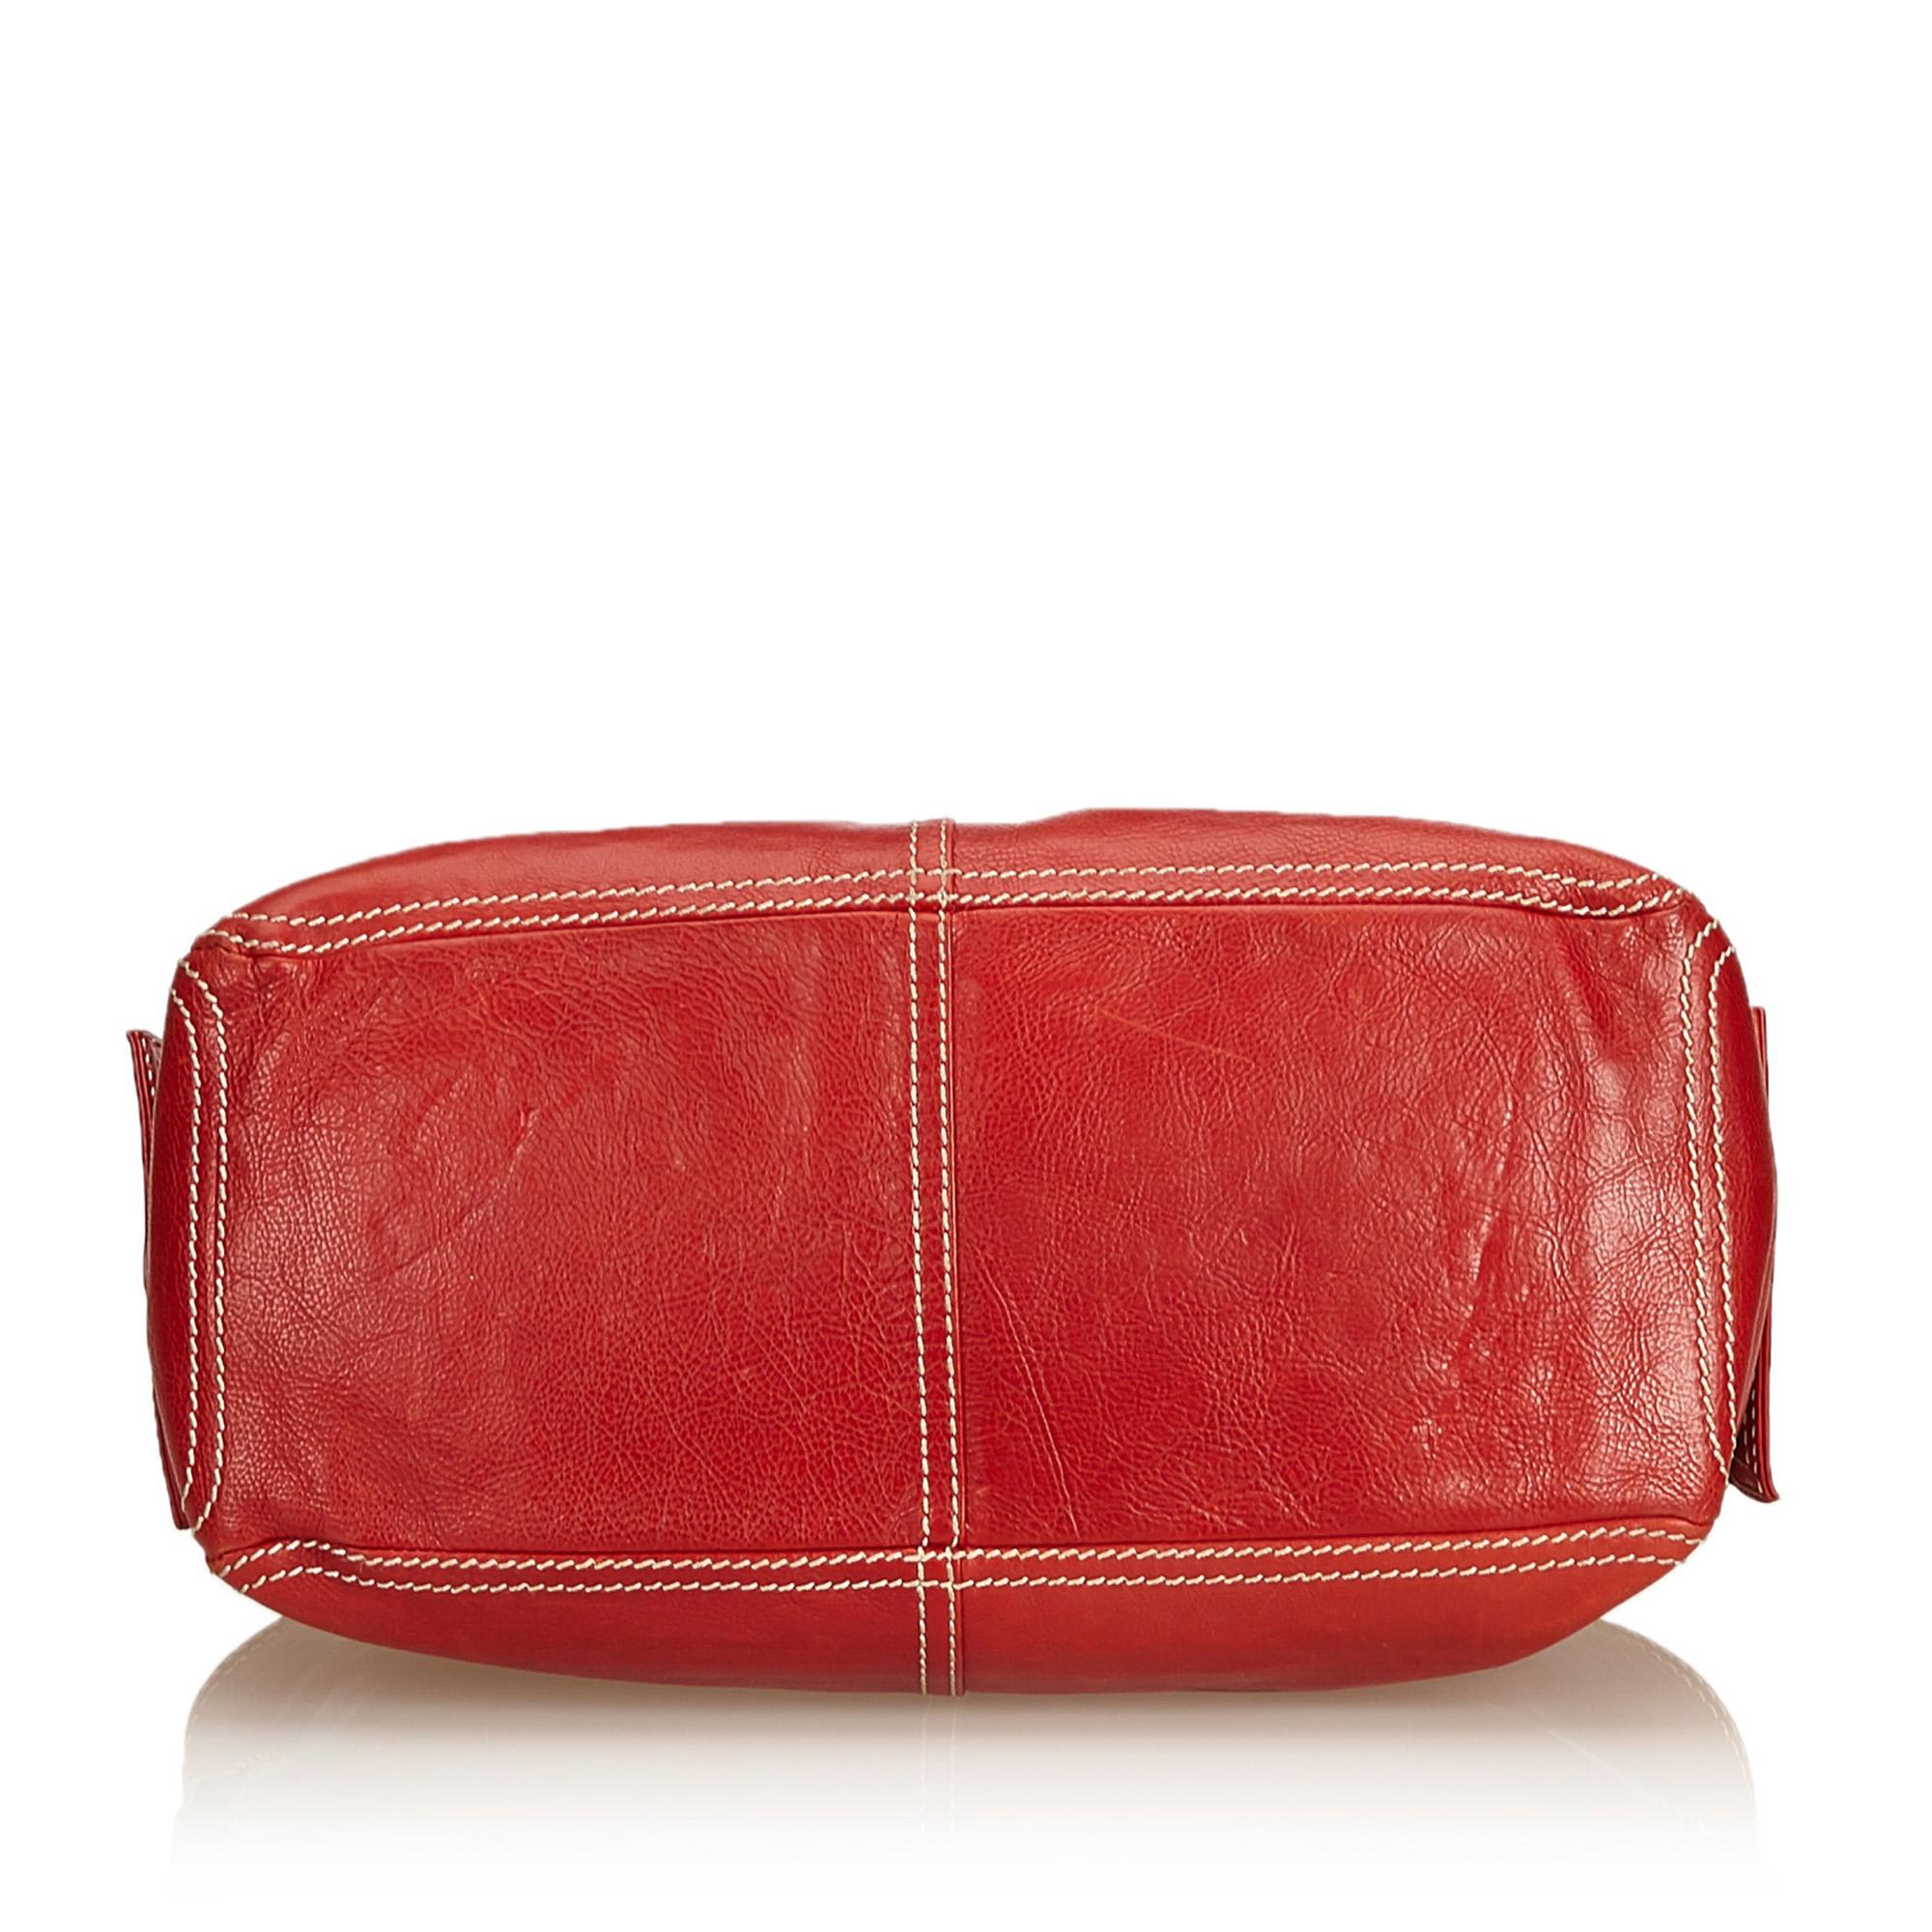 Women's Celine Red Leather Boogie Bag For Sale